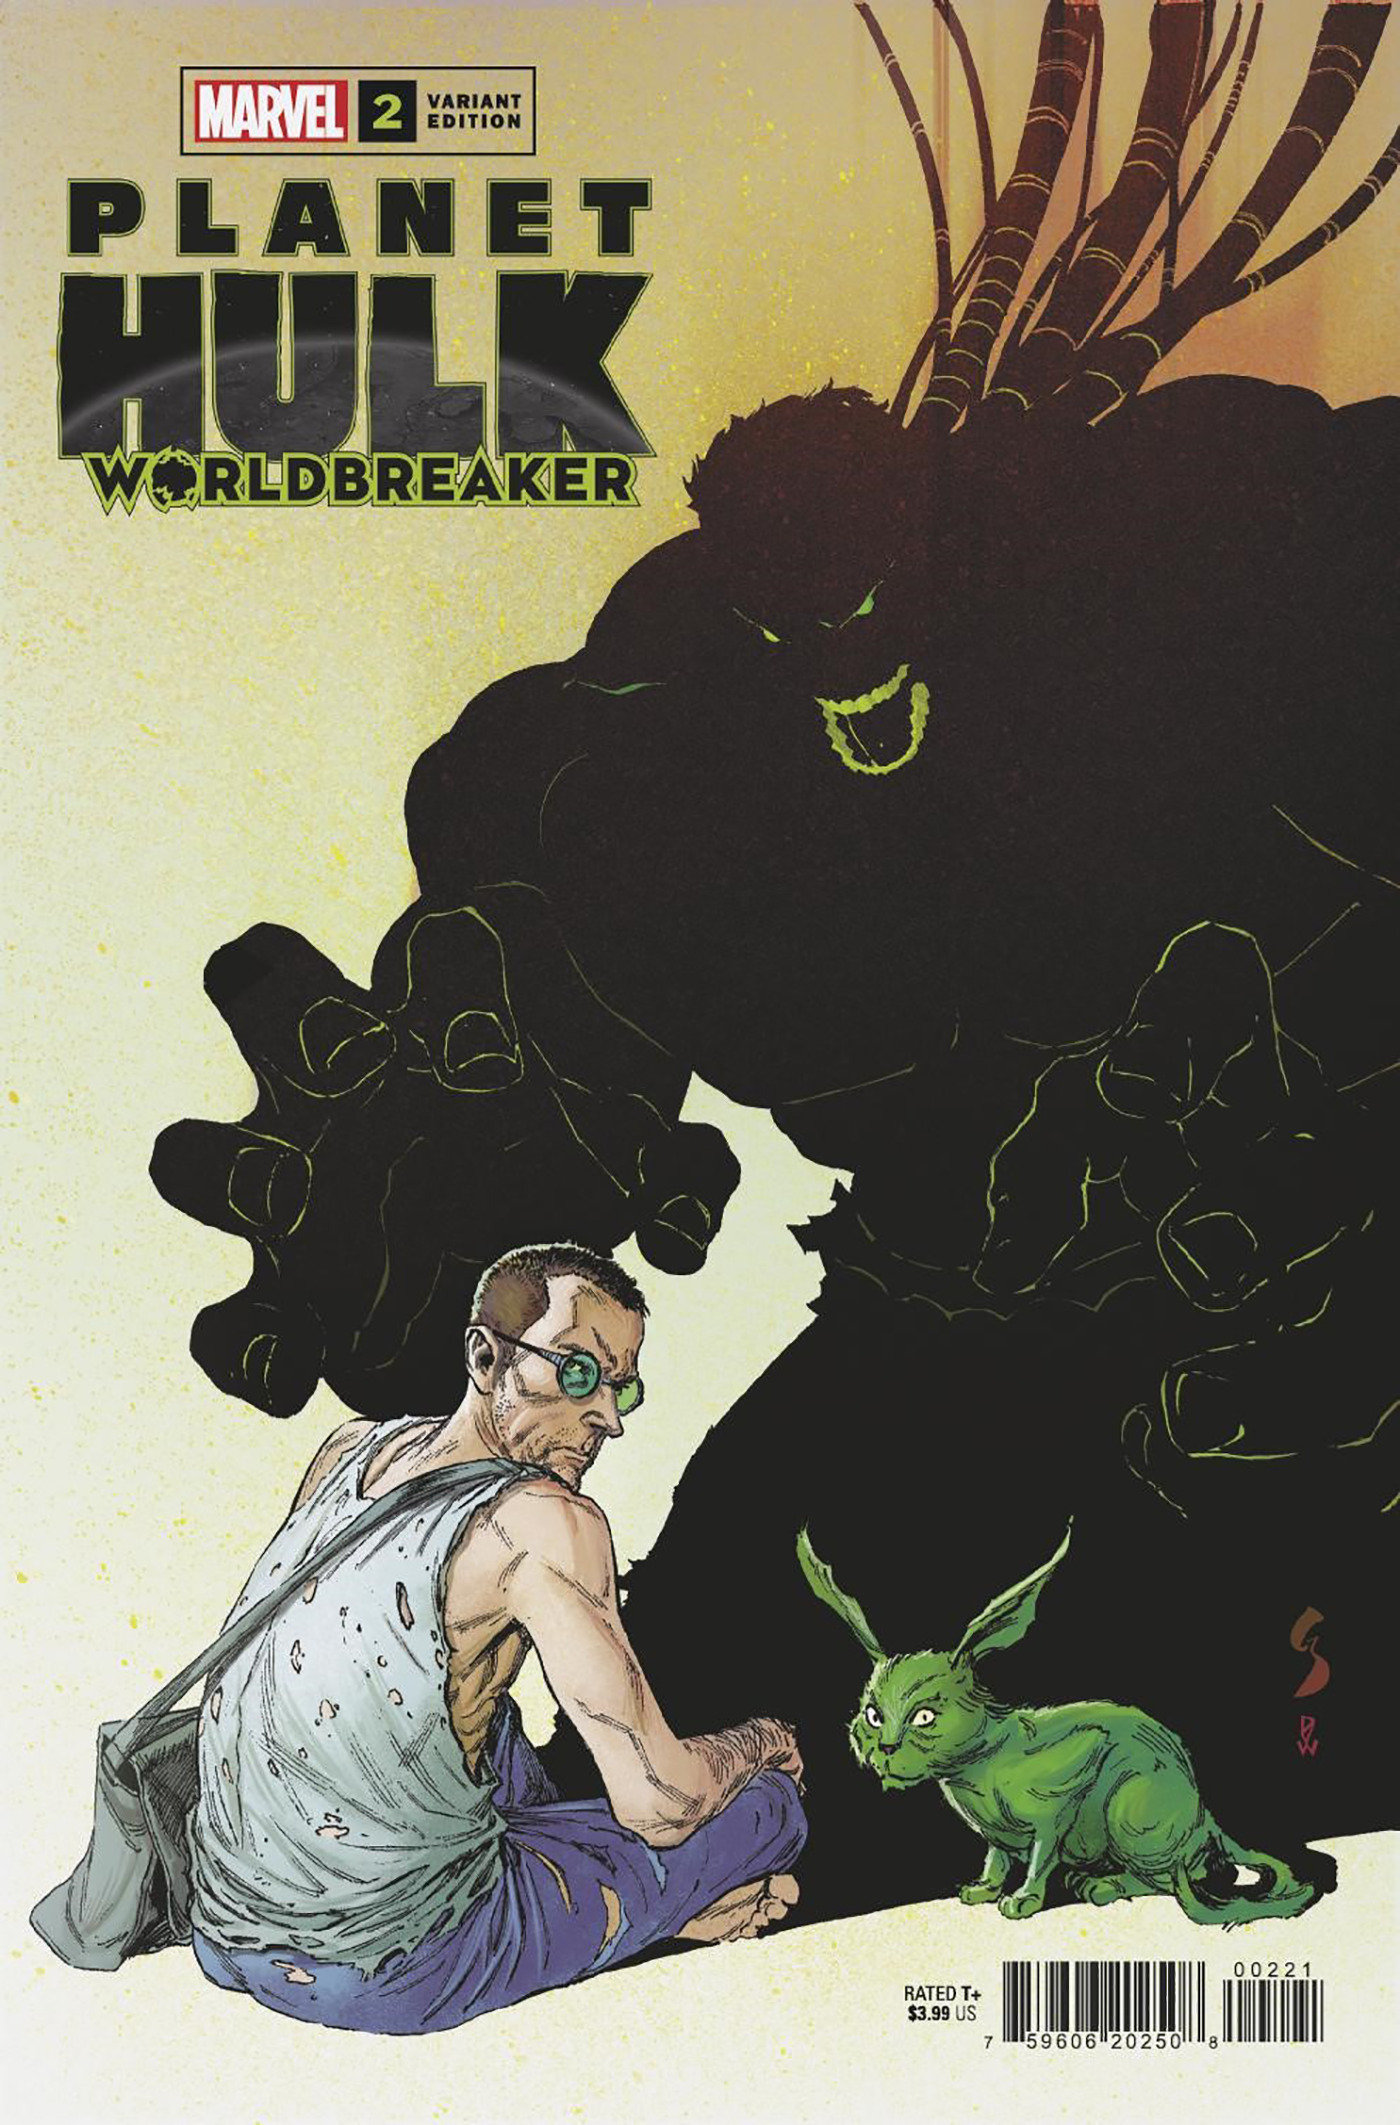 Planet Hulk Worldbreaker #2 1 for 25 Incentive Shaw Variant (Of 5)